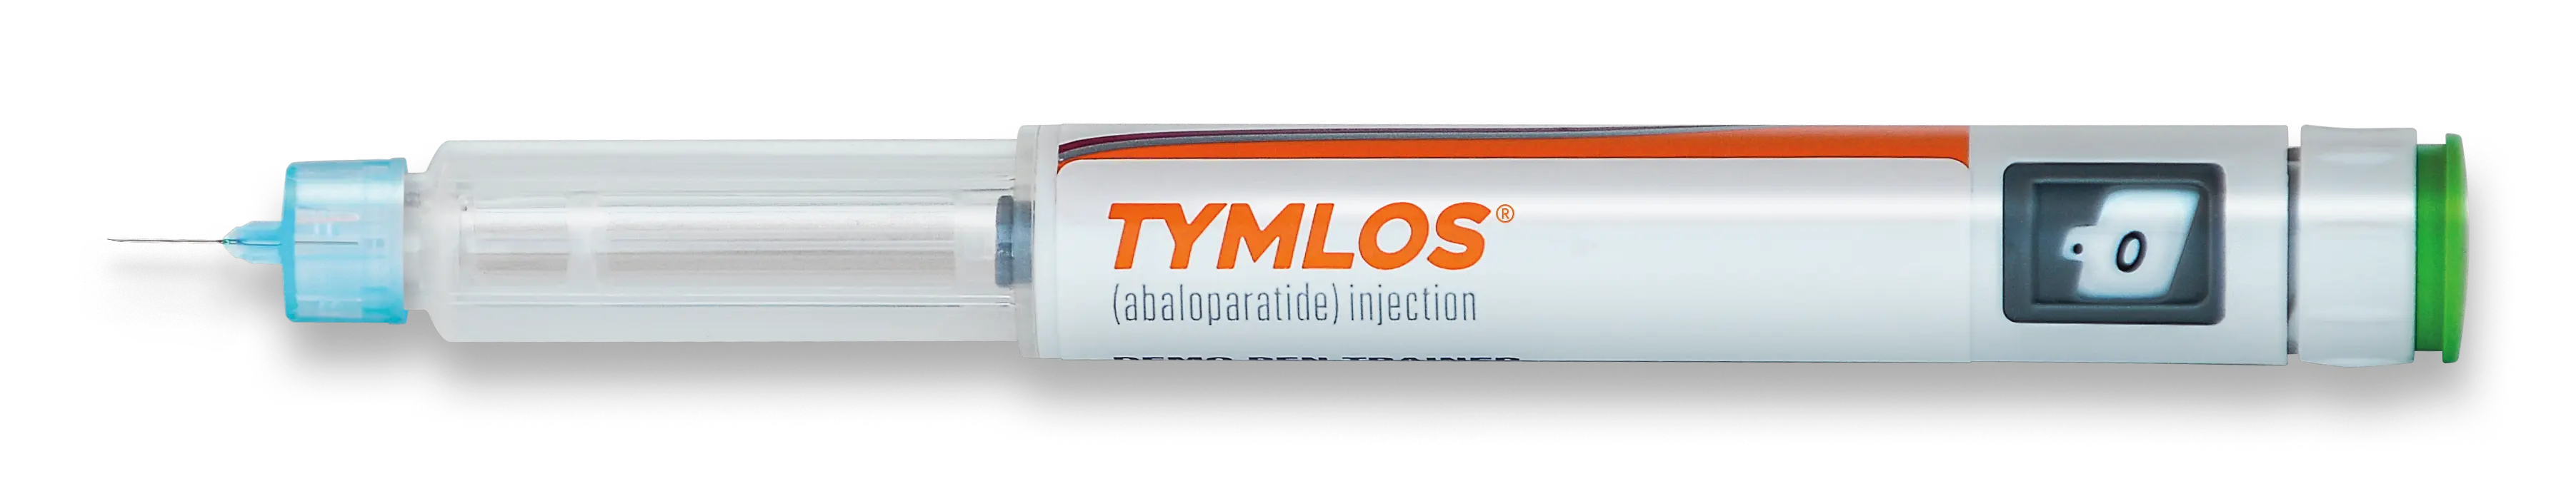 FDA Clears Tymlos for Osteoporosis in Men